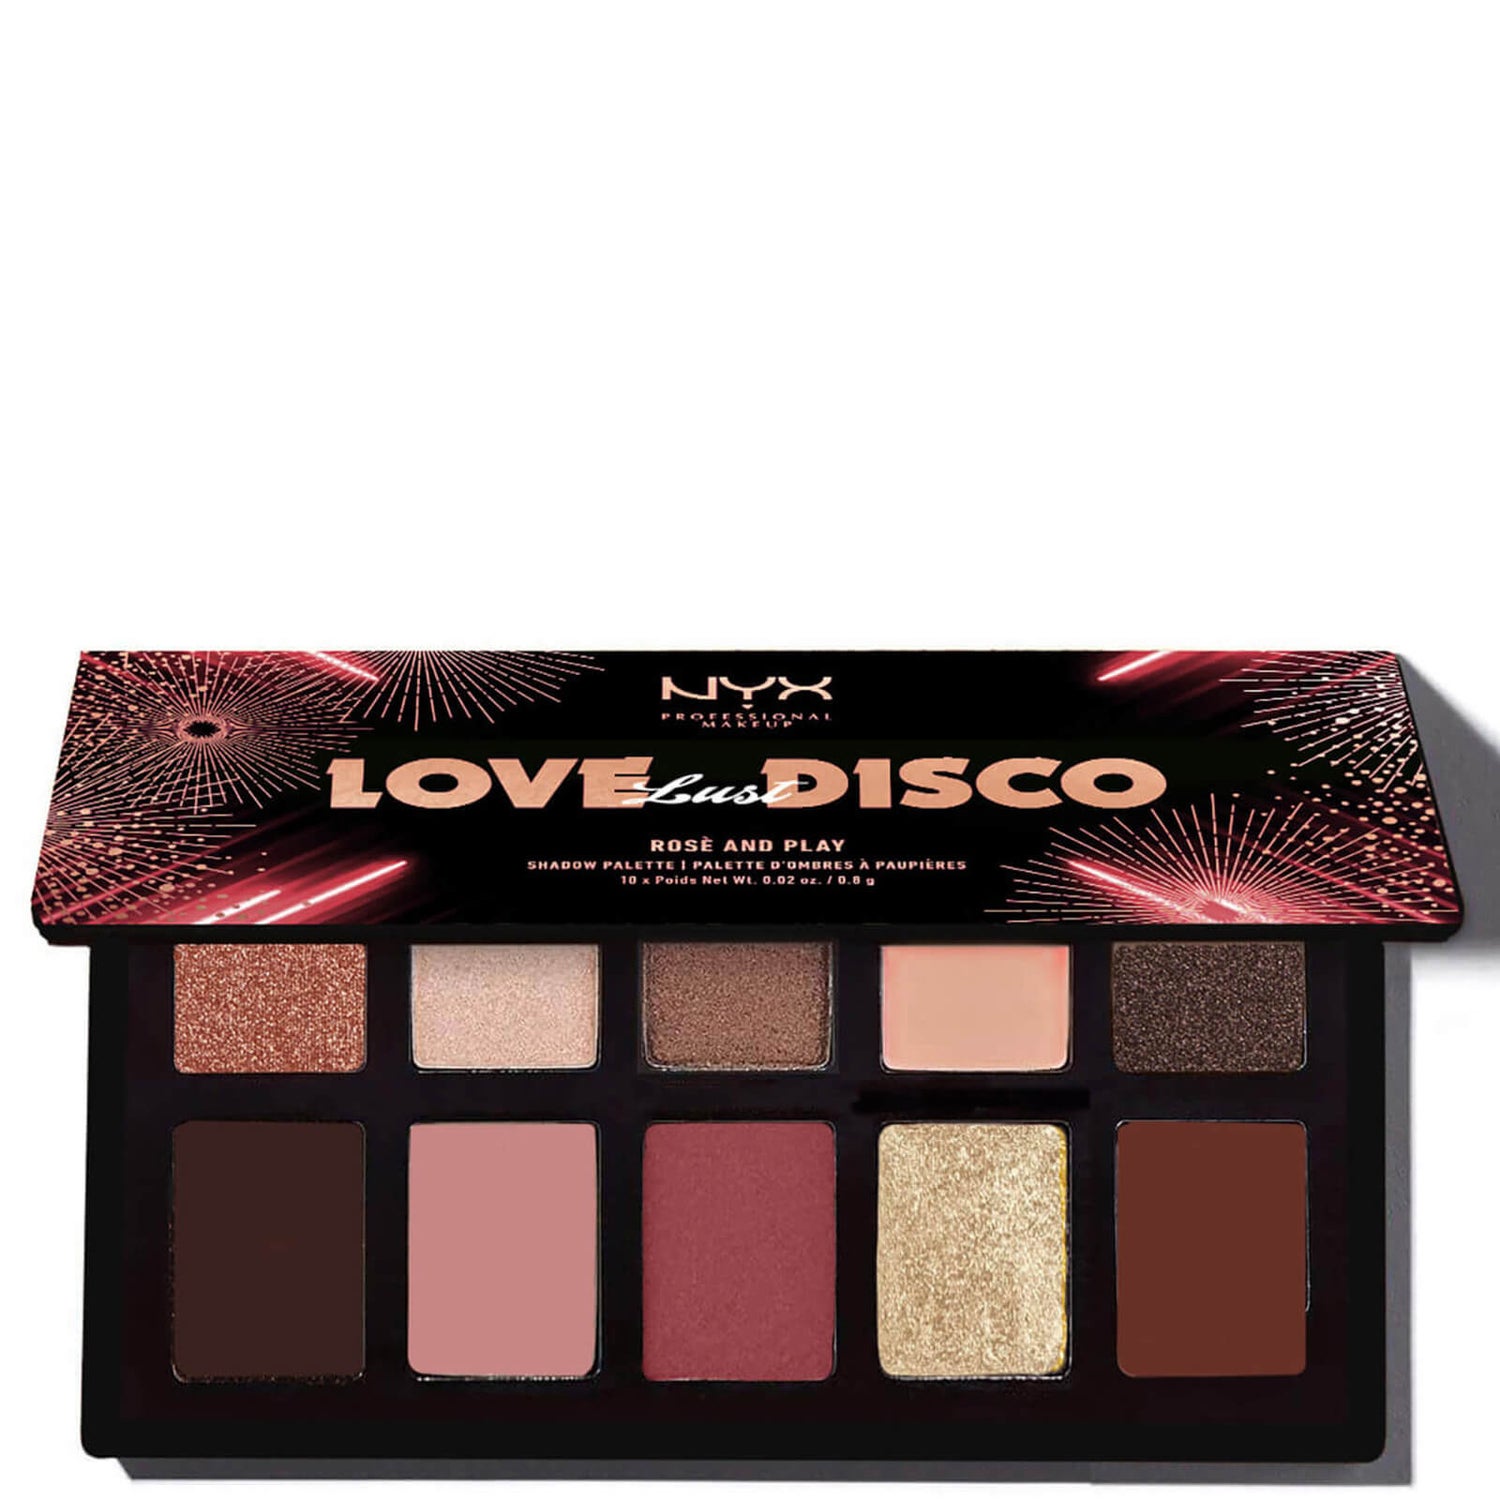 NYX Professional Makeup Love Lust & Disco Rose and Play Eyeshadow Palette